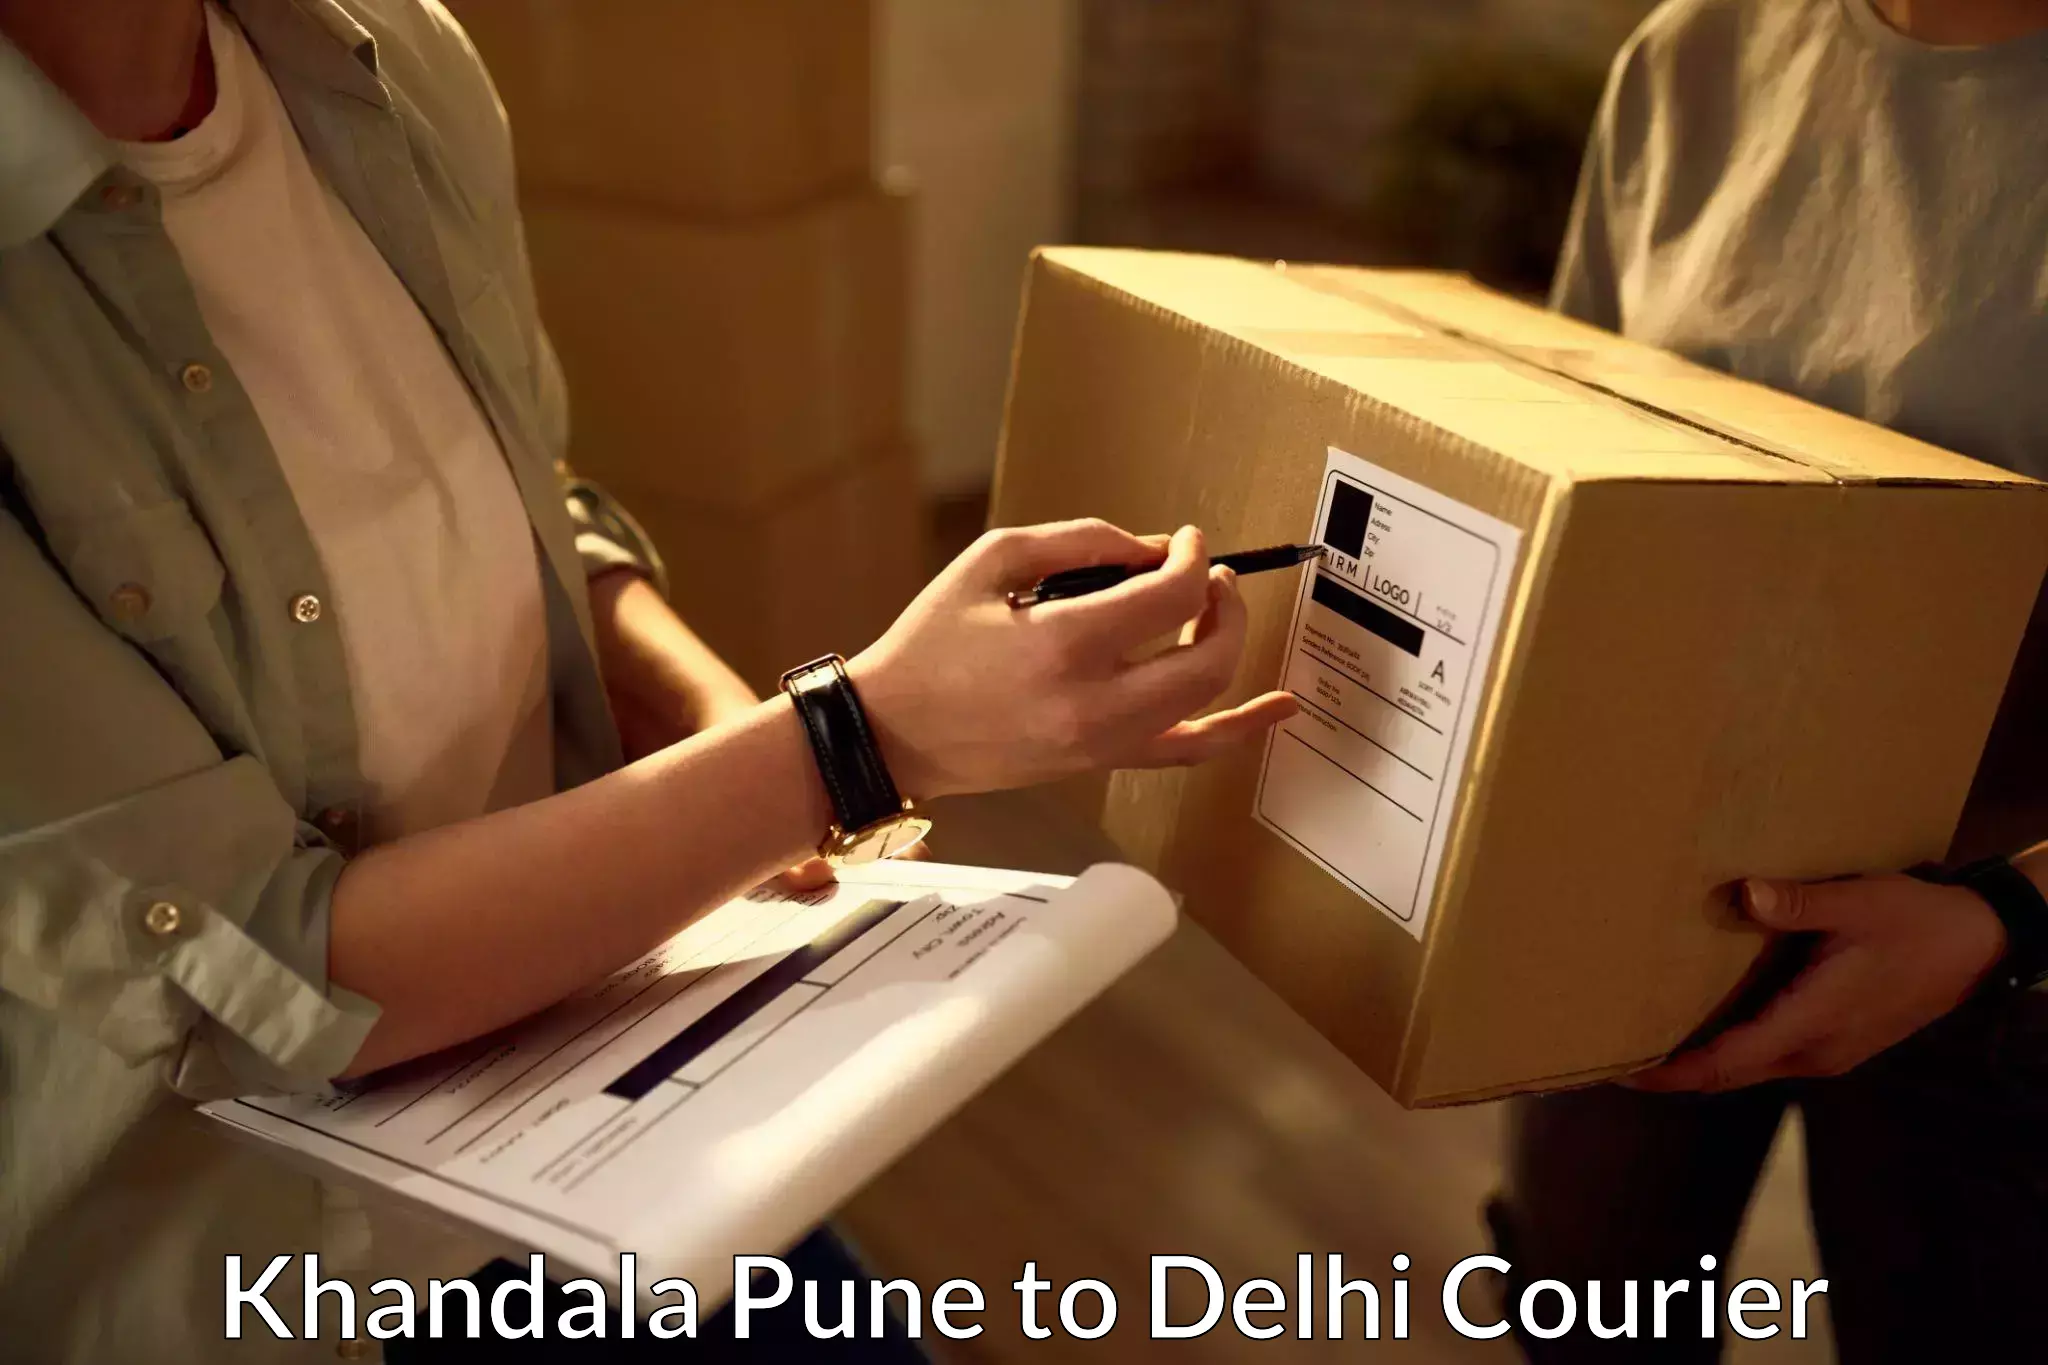 Online package tracking Khandala Pune to NCR